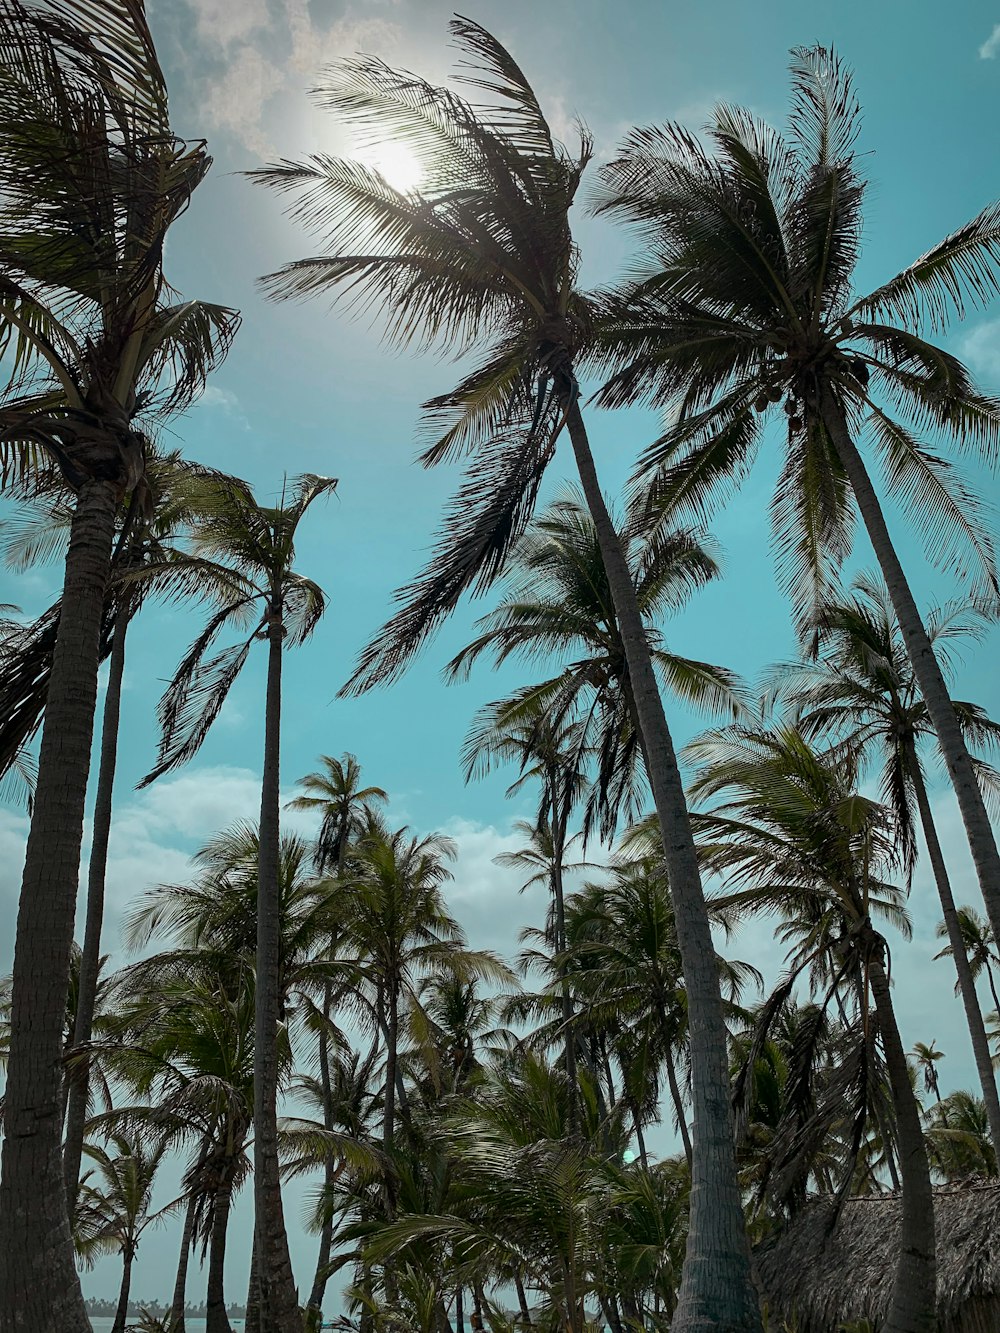 coconut palm trees under blue sky during daytime